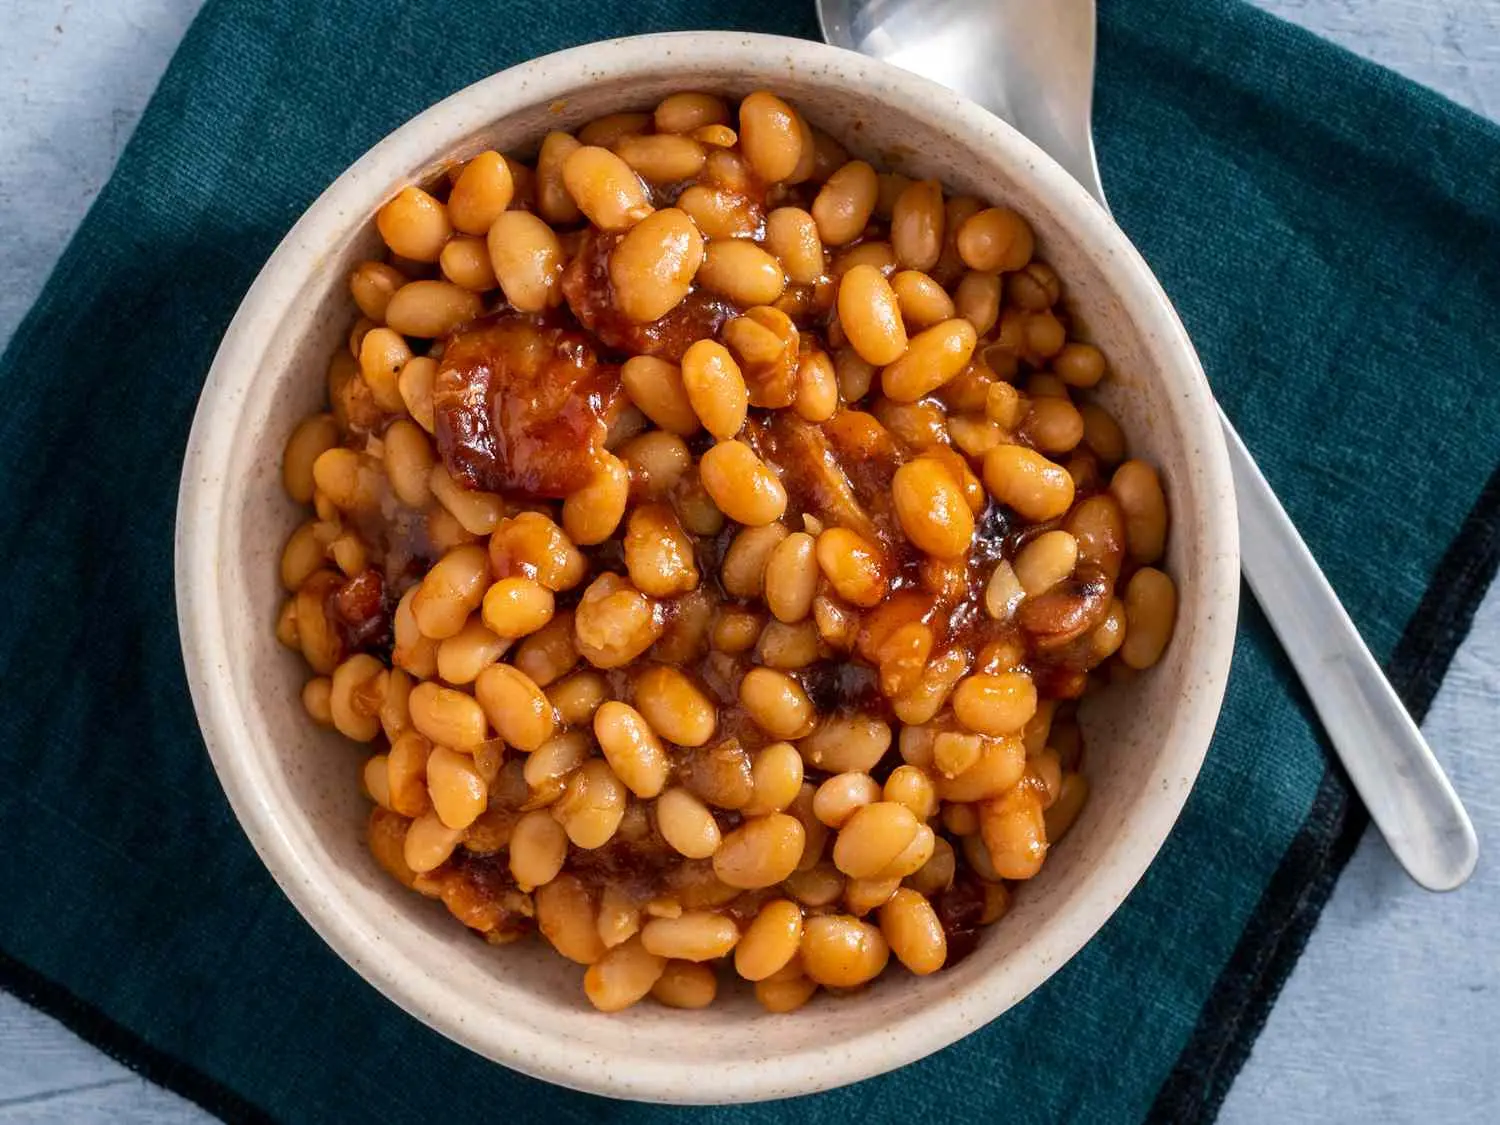 bbq smoked baked beans - What's the difference between baked beans and Boston baked beans